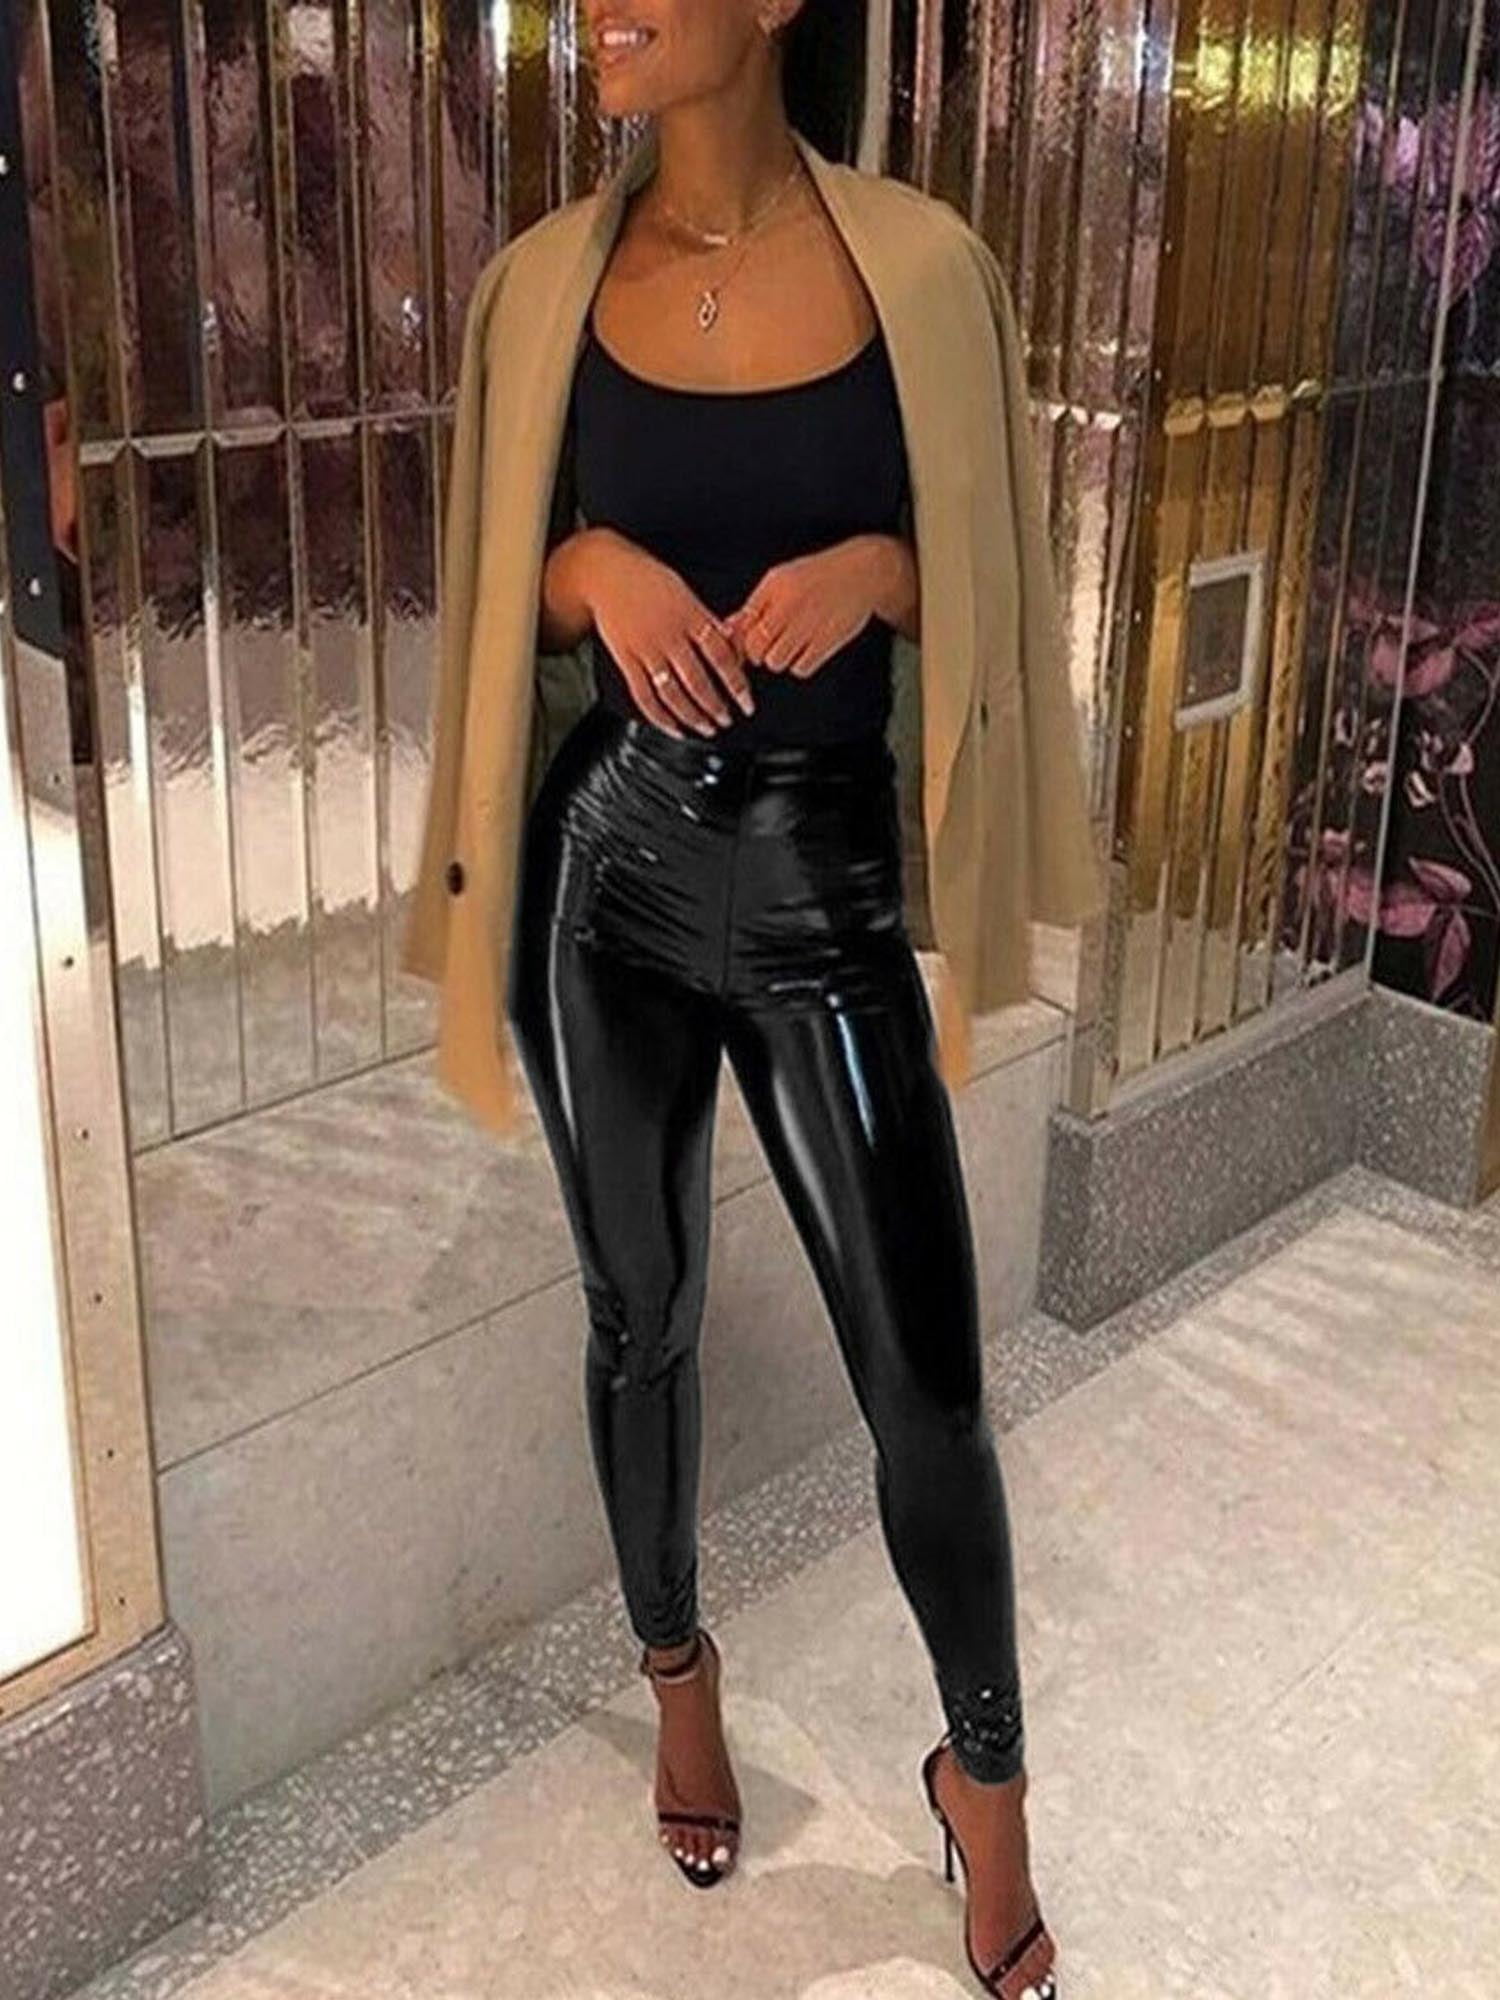 Women's PU Leather Trousers High Waist Solid Color Shiny Stretchy